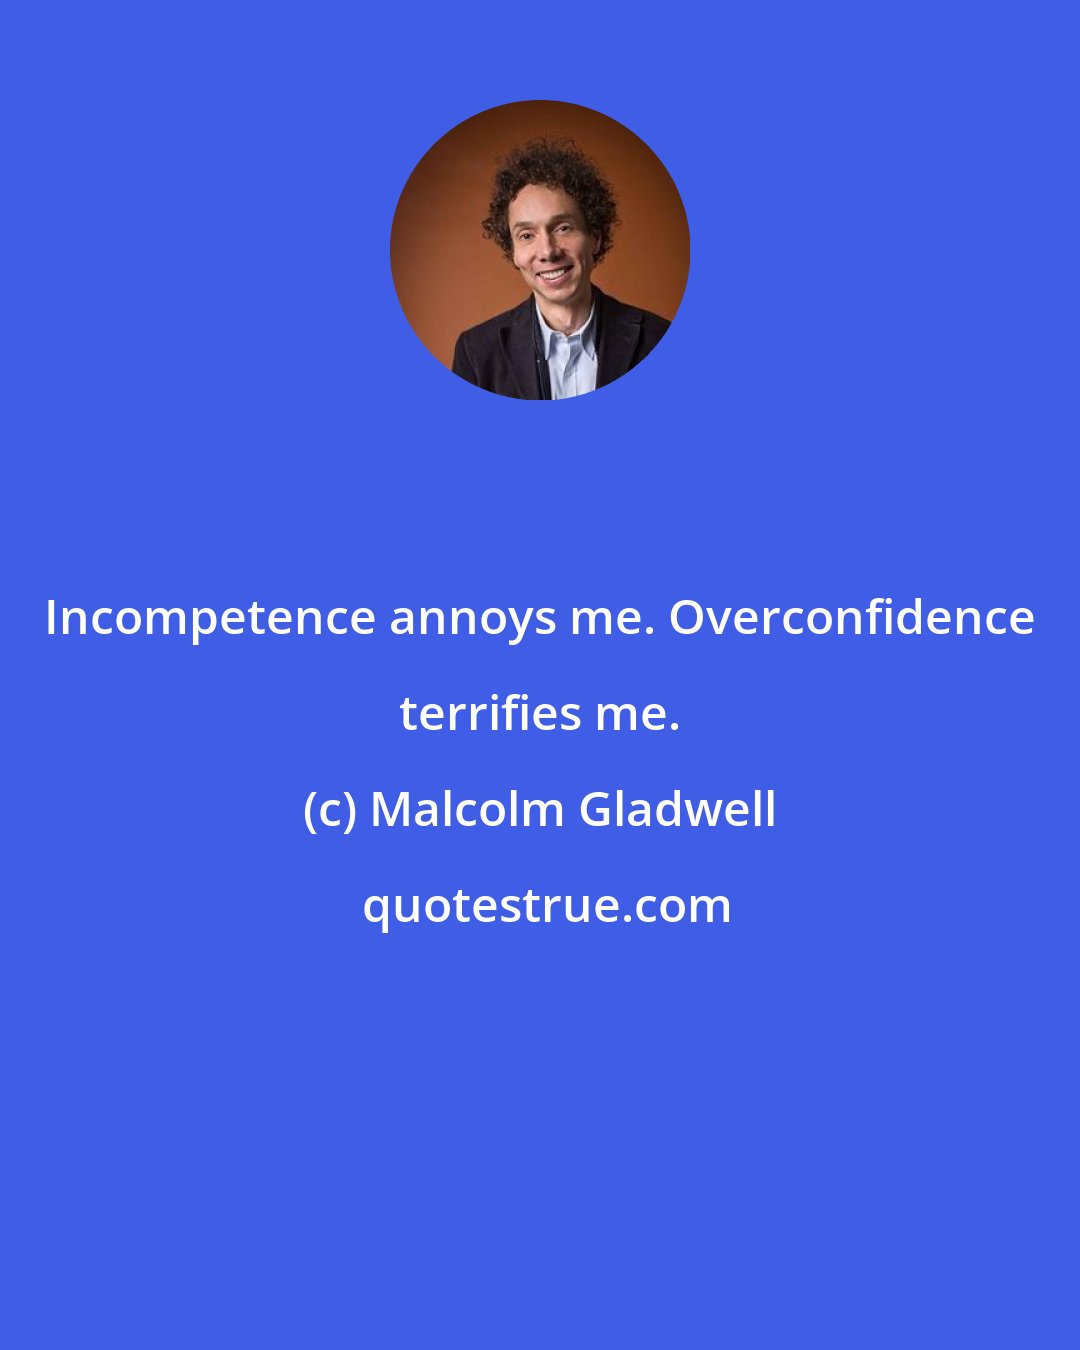 Malcolm Gladwell: Incompetence annoys me. Overconfidence terrifies me.